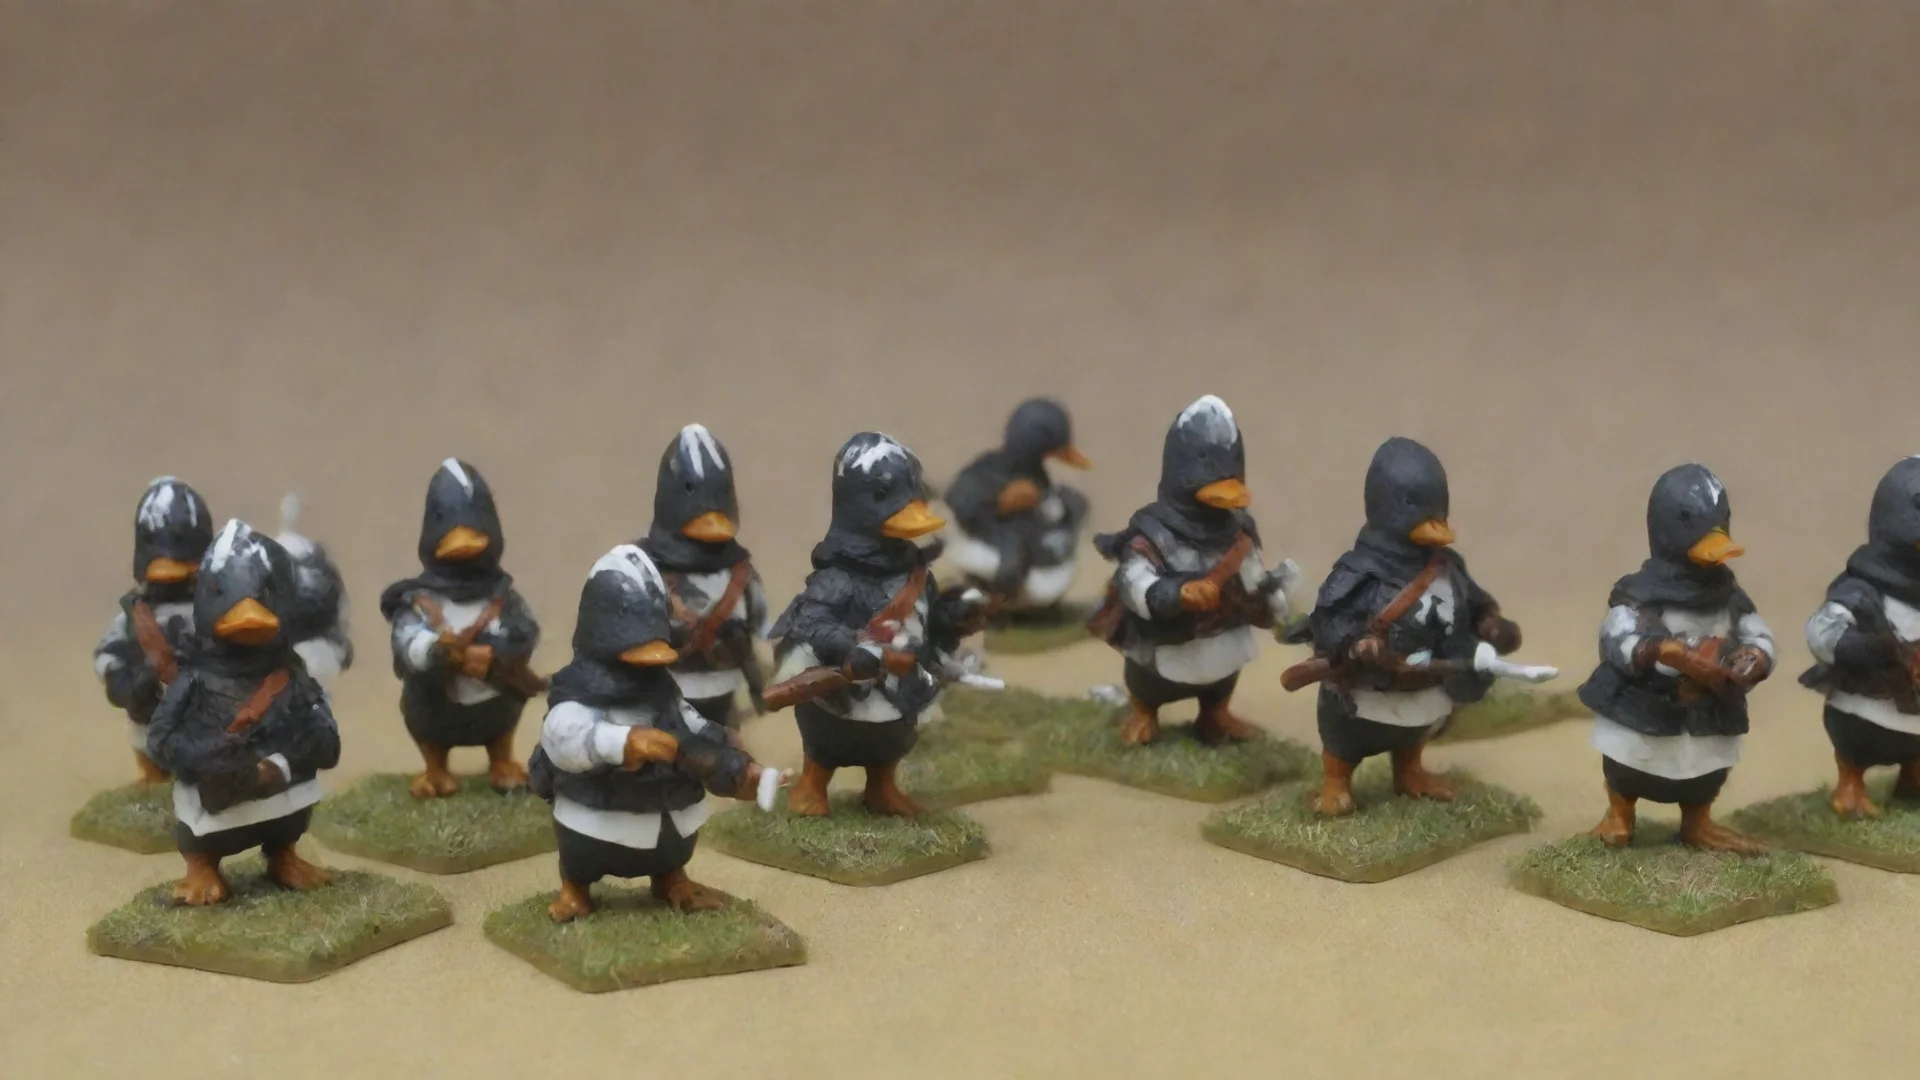 aiartstation art knights hospitaller duck army with white crossing confident engaging wow 3 hdwidescreen